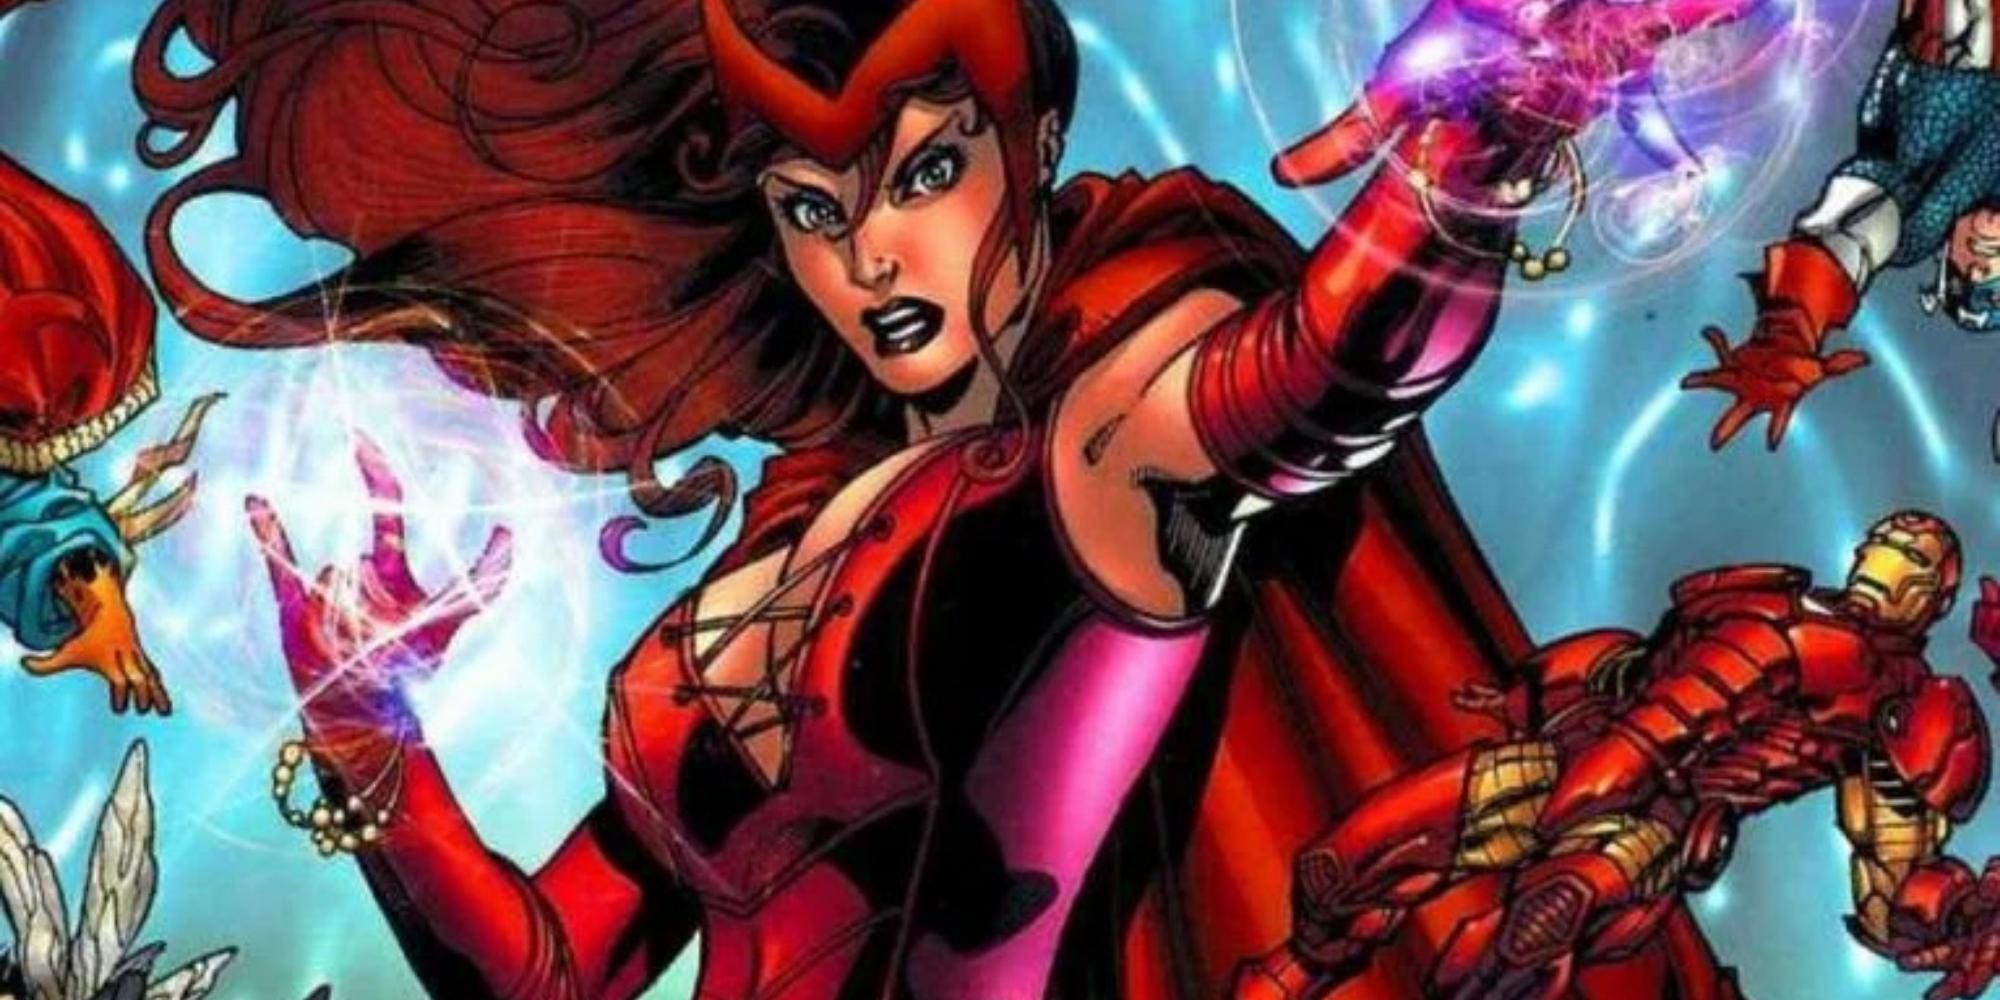 Scarlet Witch surrounding by Avengers.